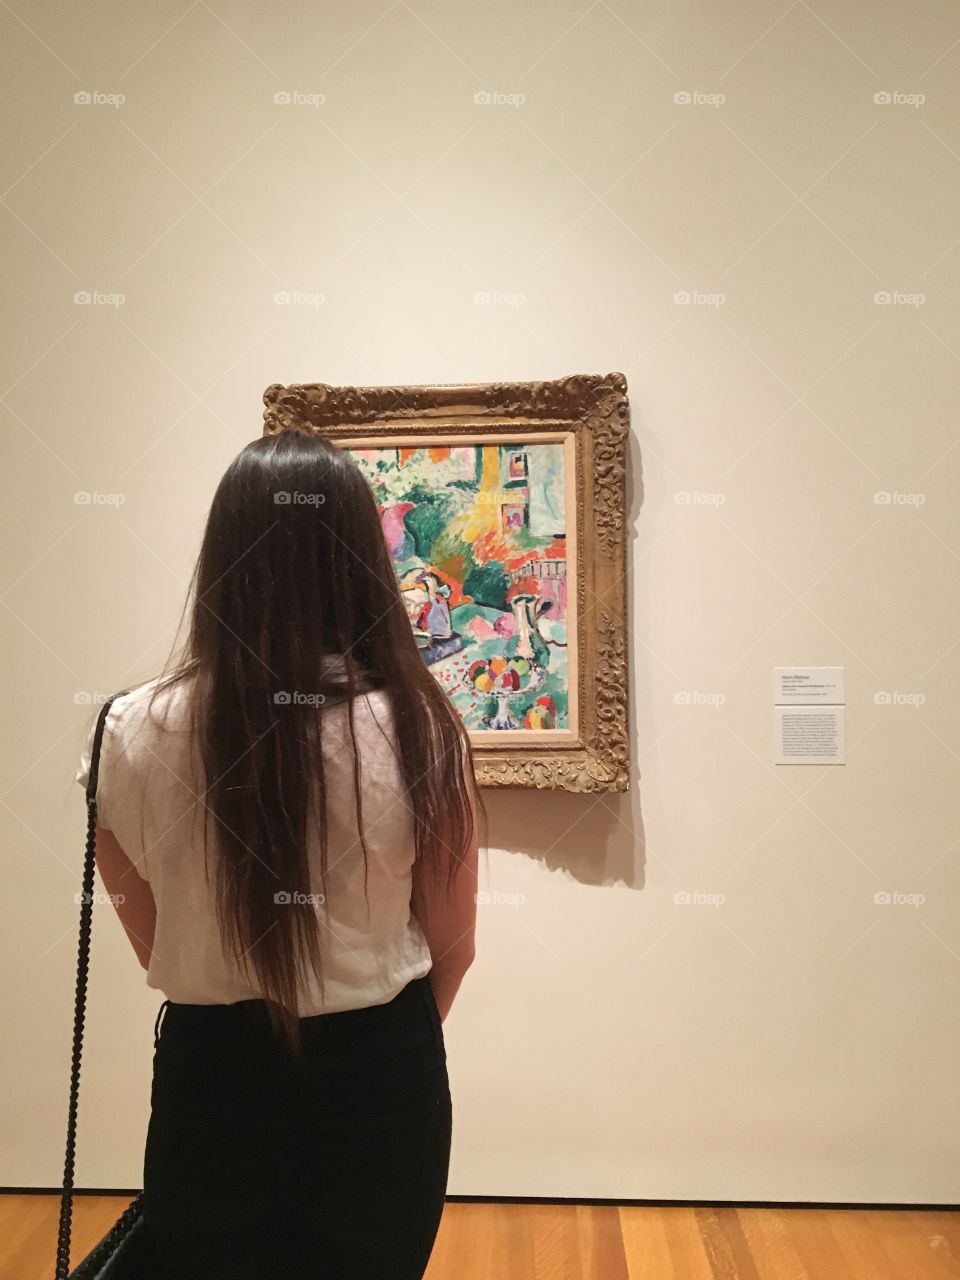 Moment at the MoMA